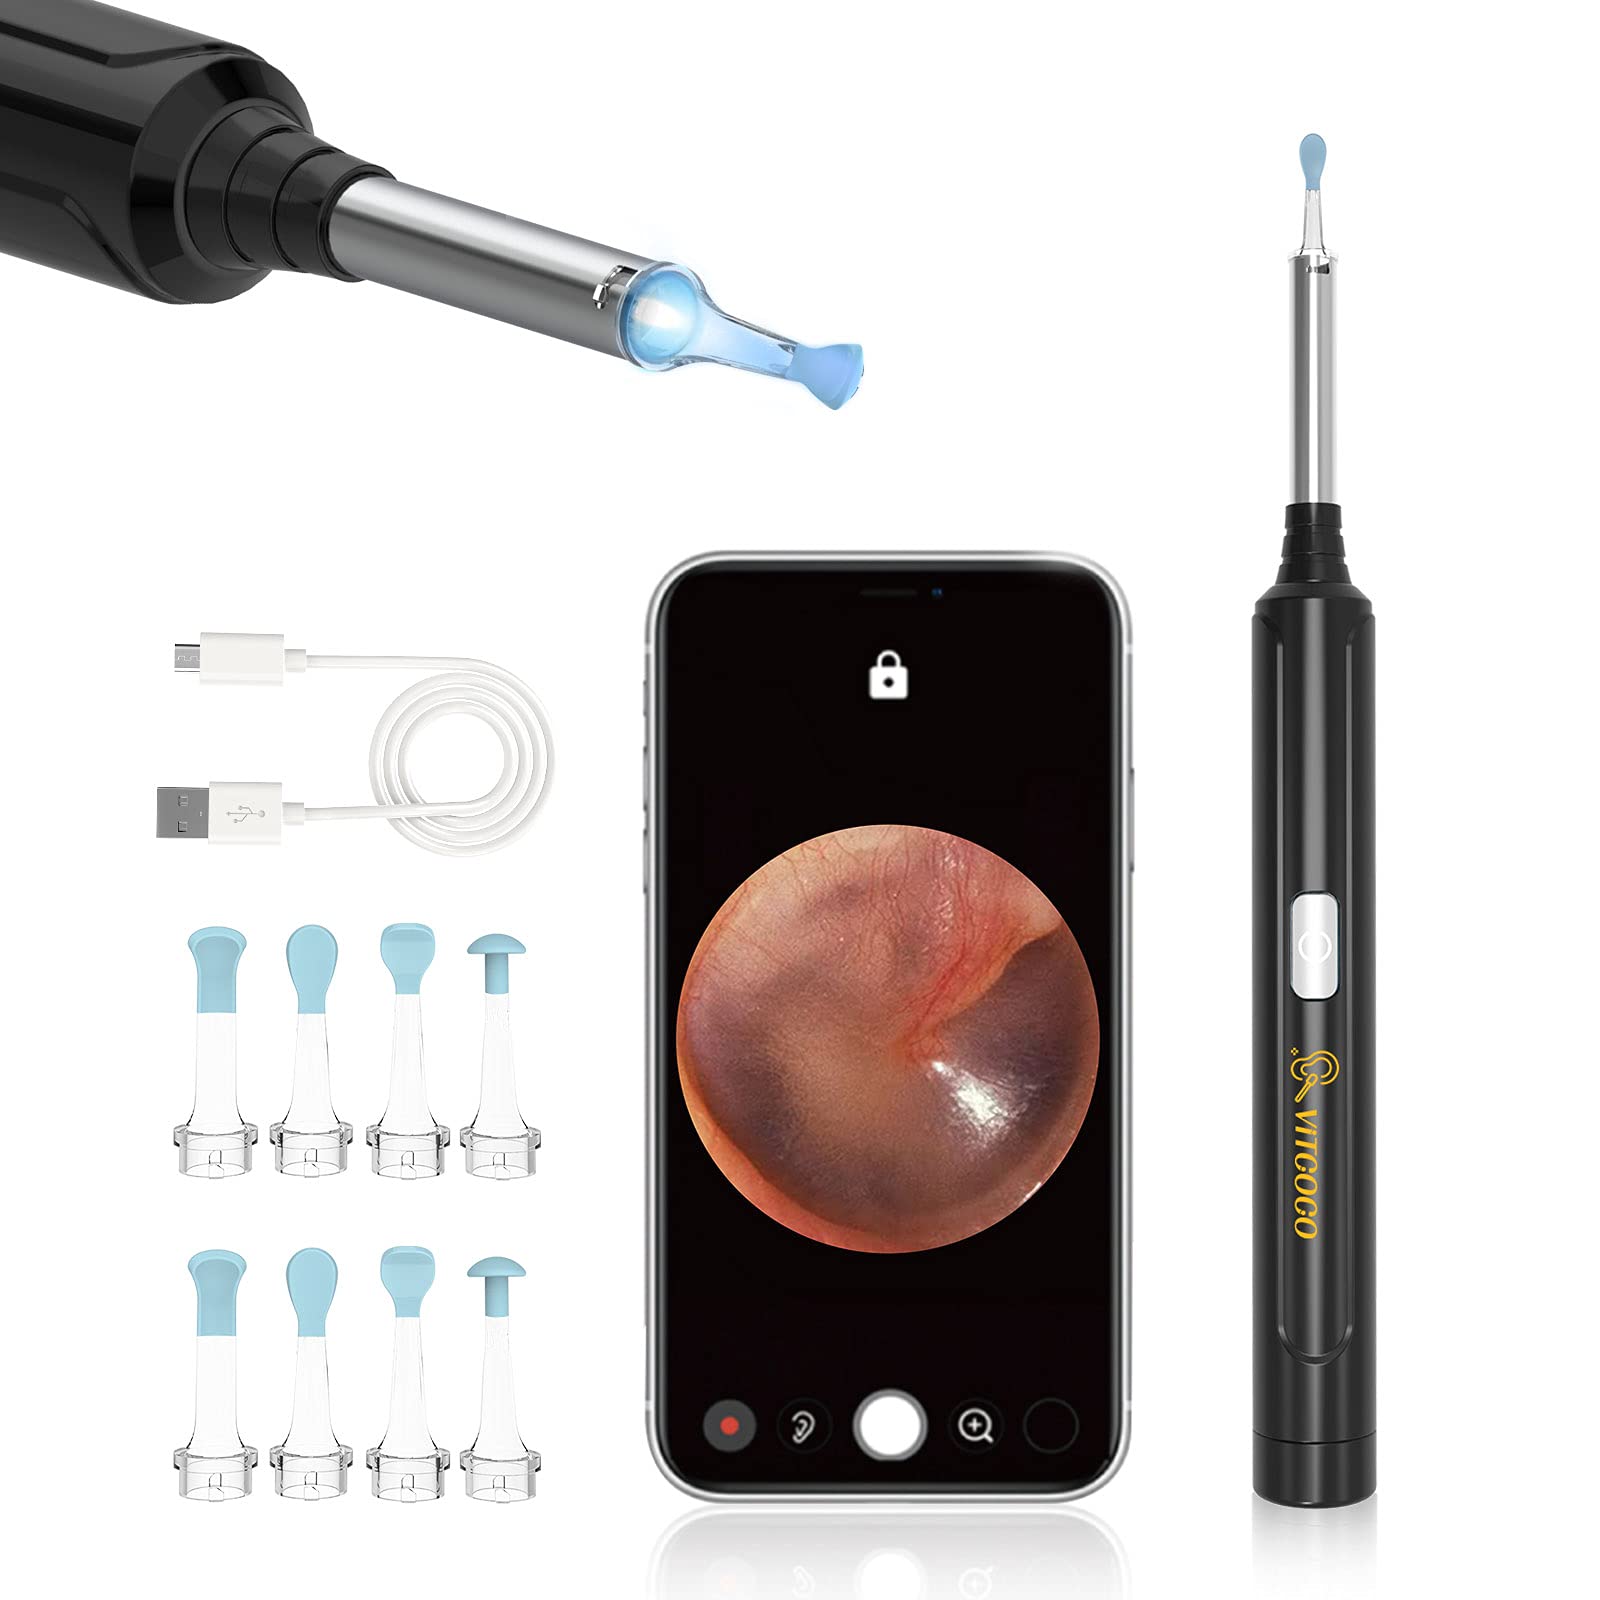 Ear Wax Removal Endoscope Otoscope, Earwax Remover Tools, Ear Wax Picker,  with 1080P FHD Camera, 6 Led Lights, Wireless Connected, Compatible with